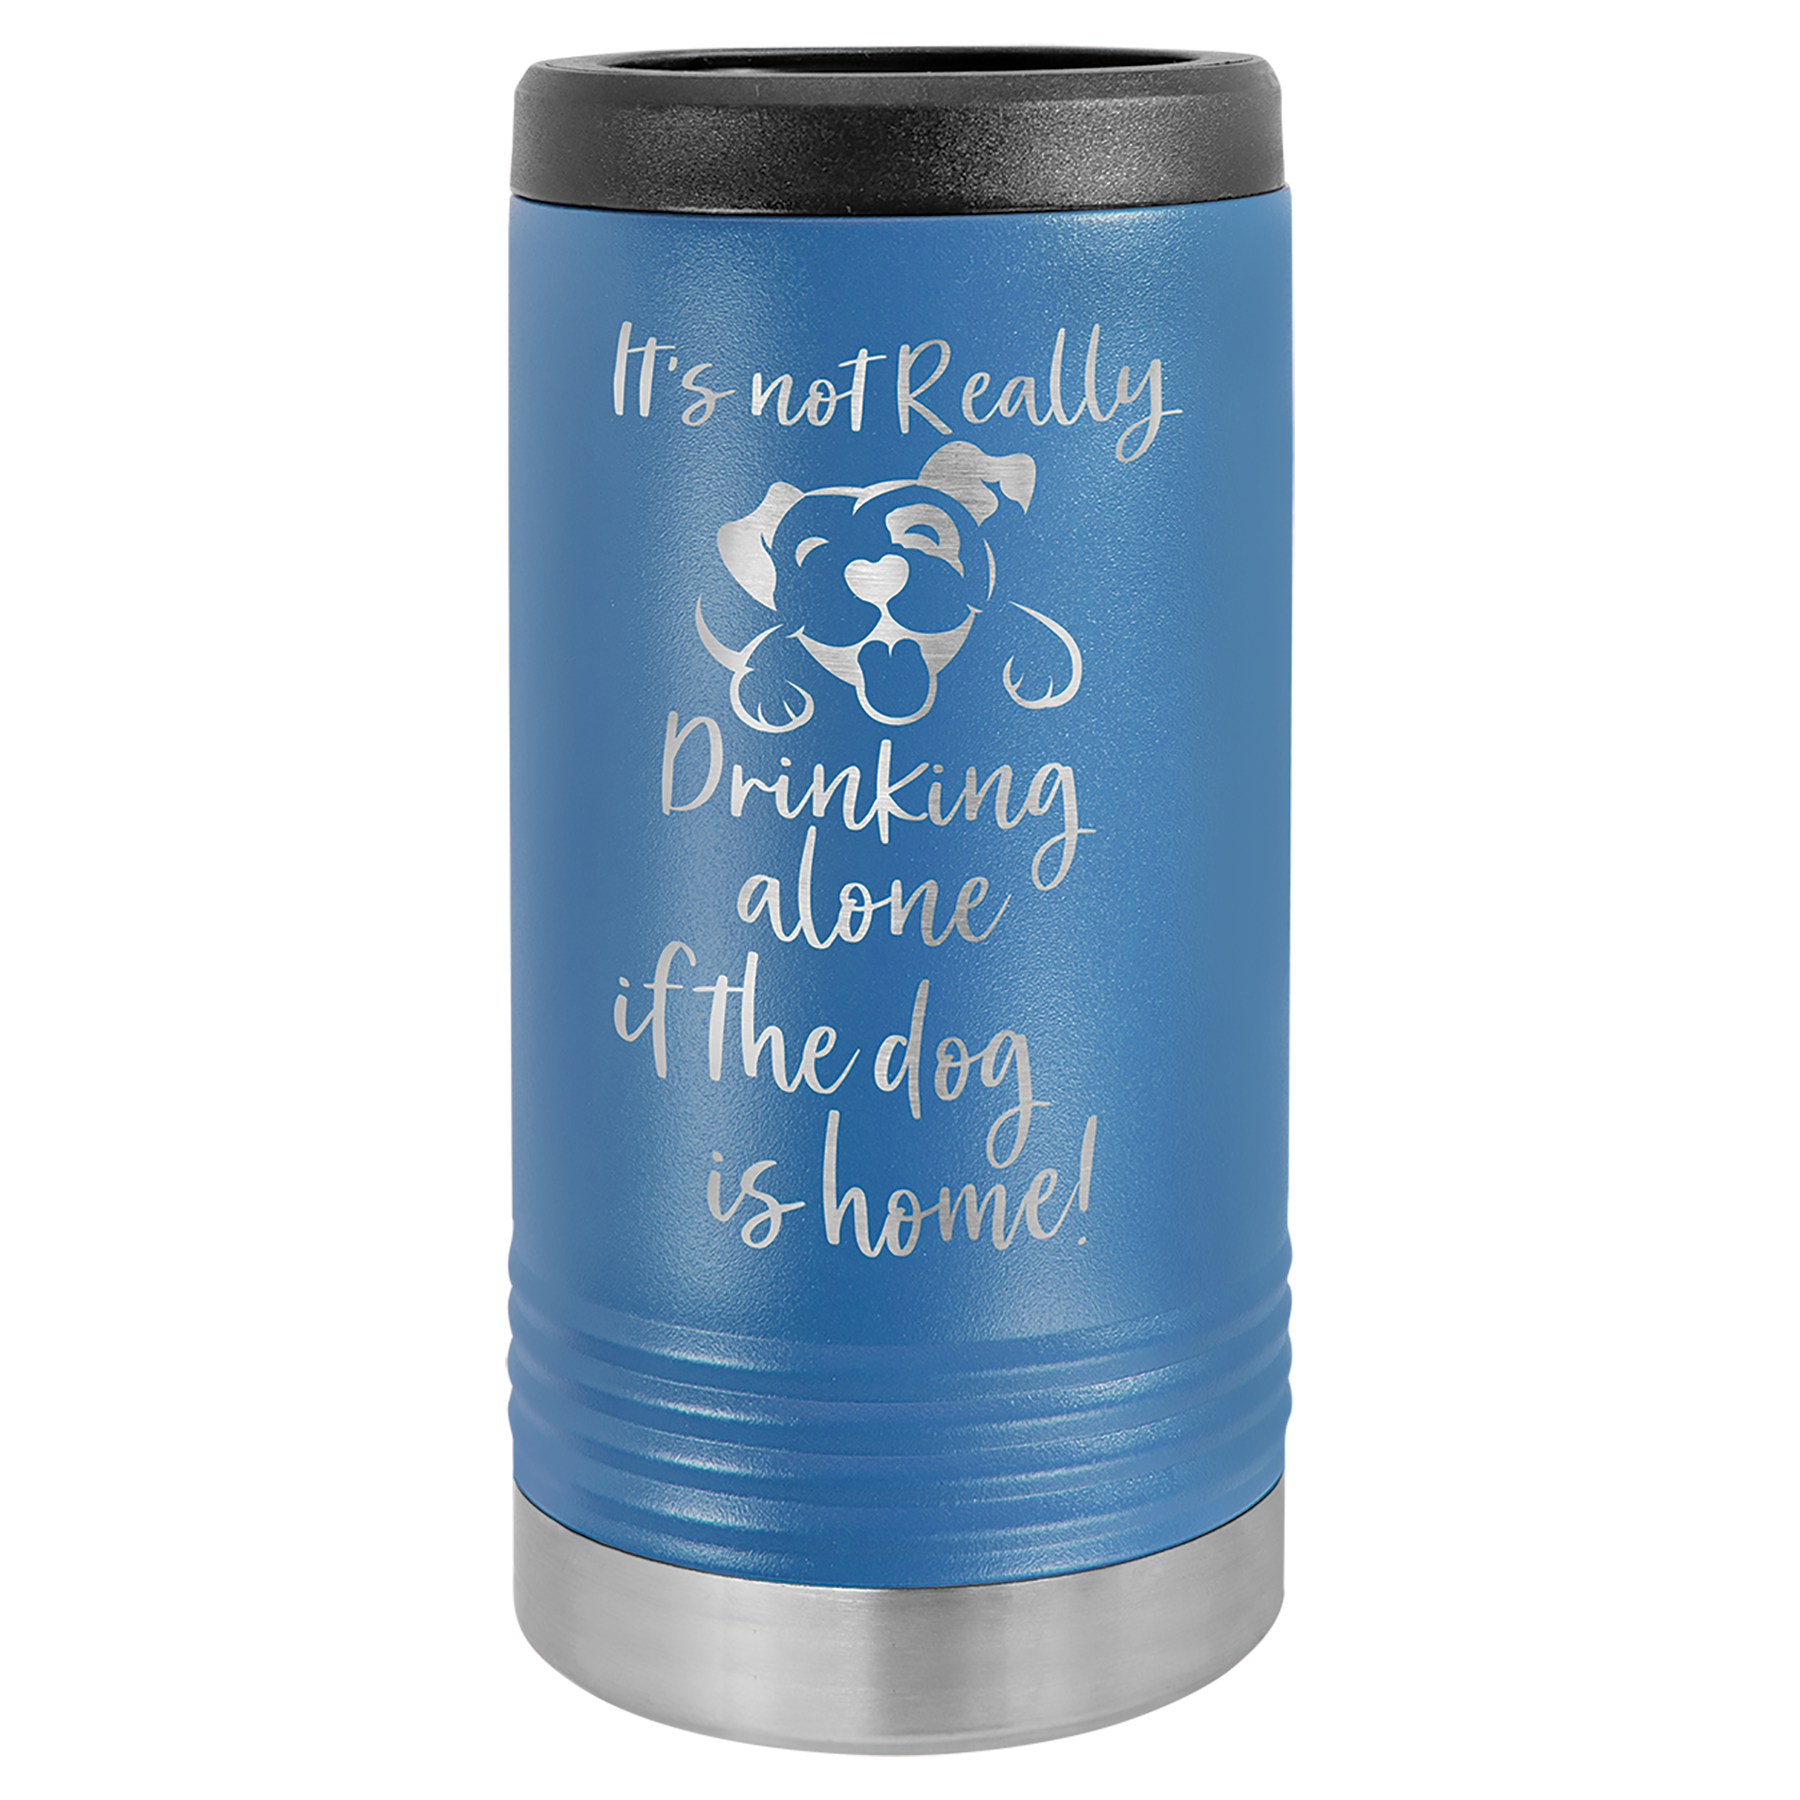 12oz Slim Laser Engraved Personalized on a Yeti Slim Can Seltzer Cooler  Sleeve Gift for Her Gifts for Him Party Favors -  Norway